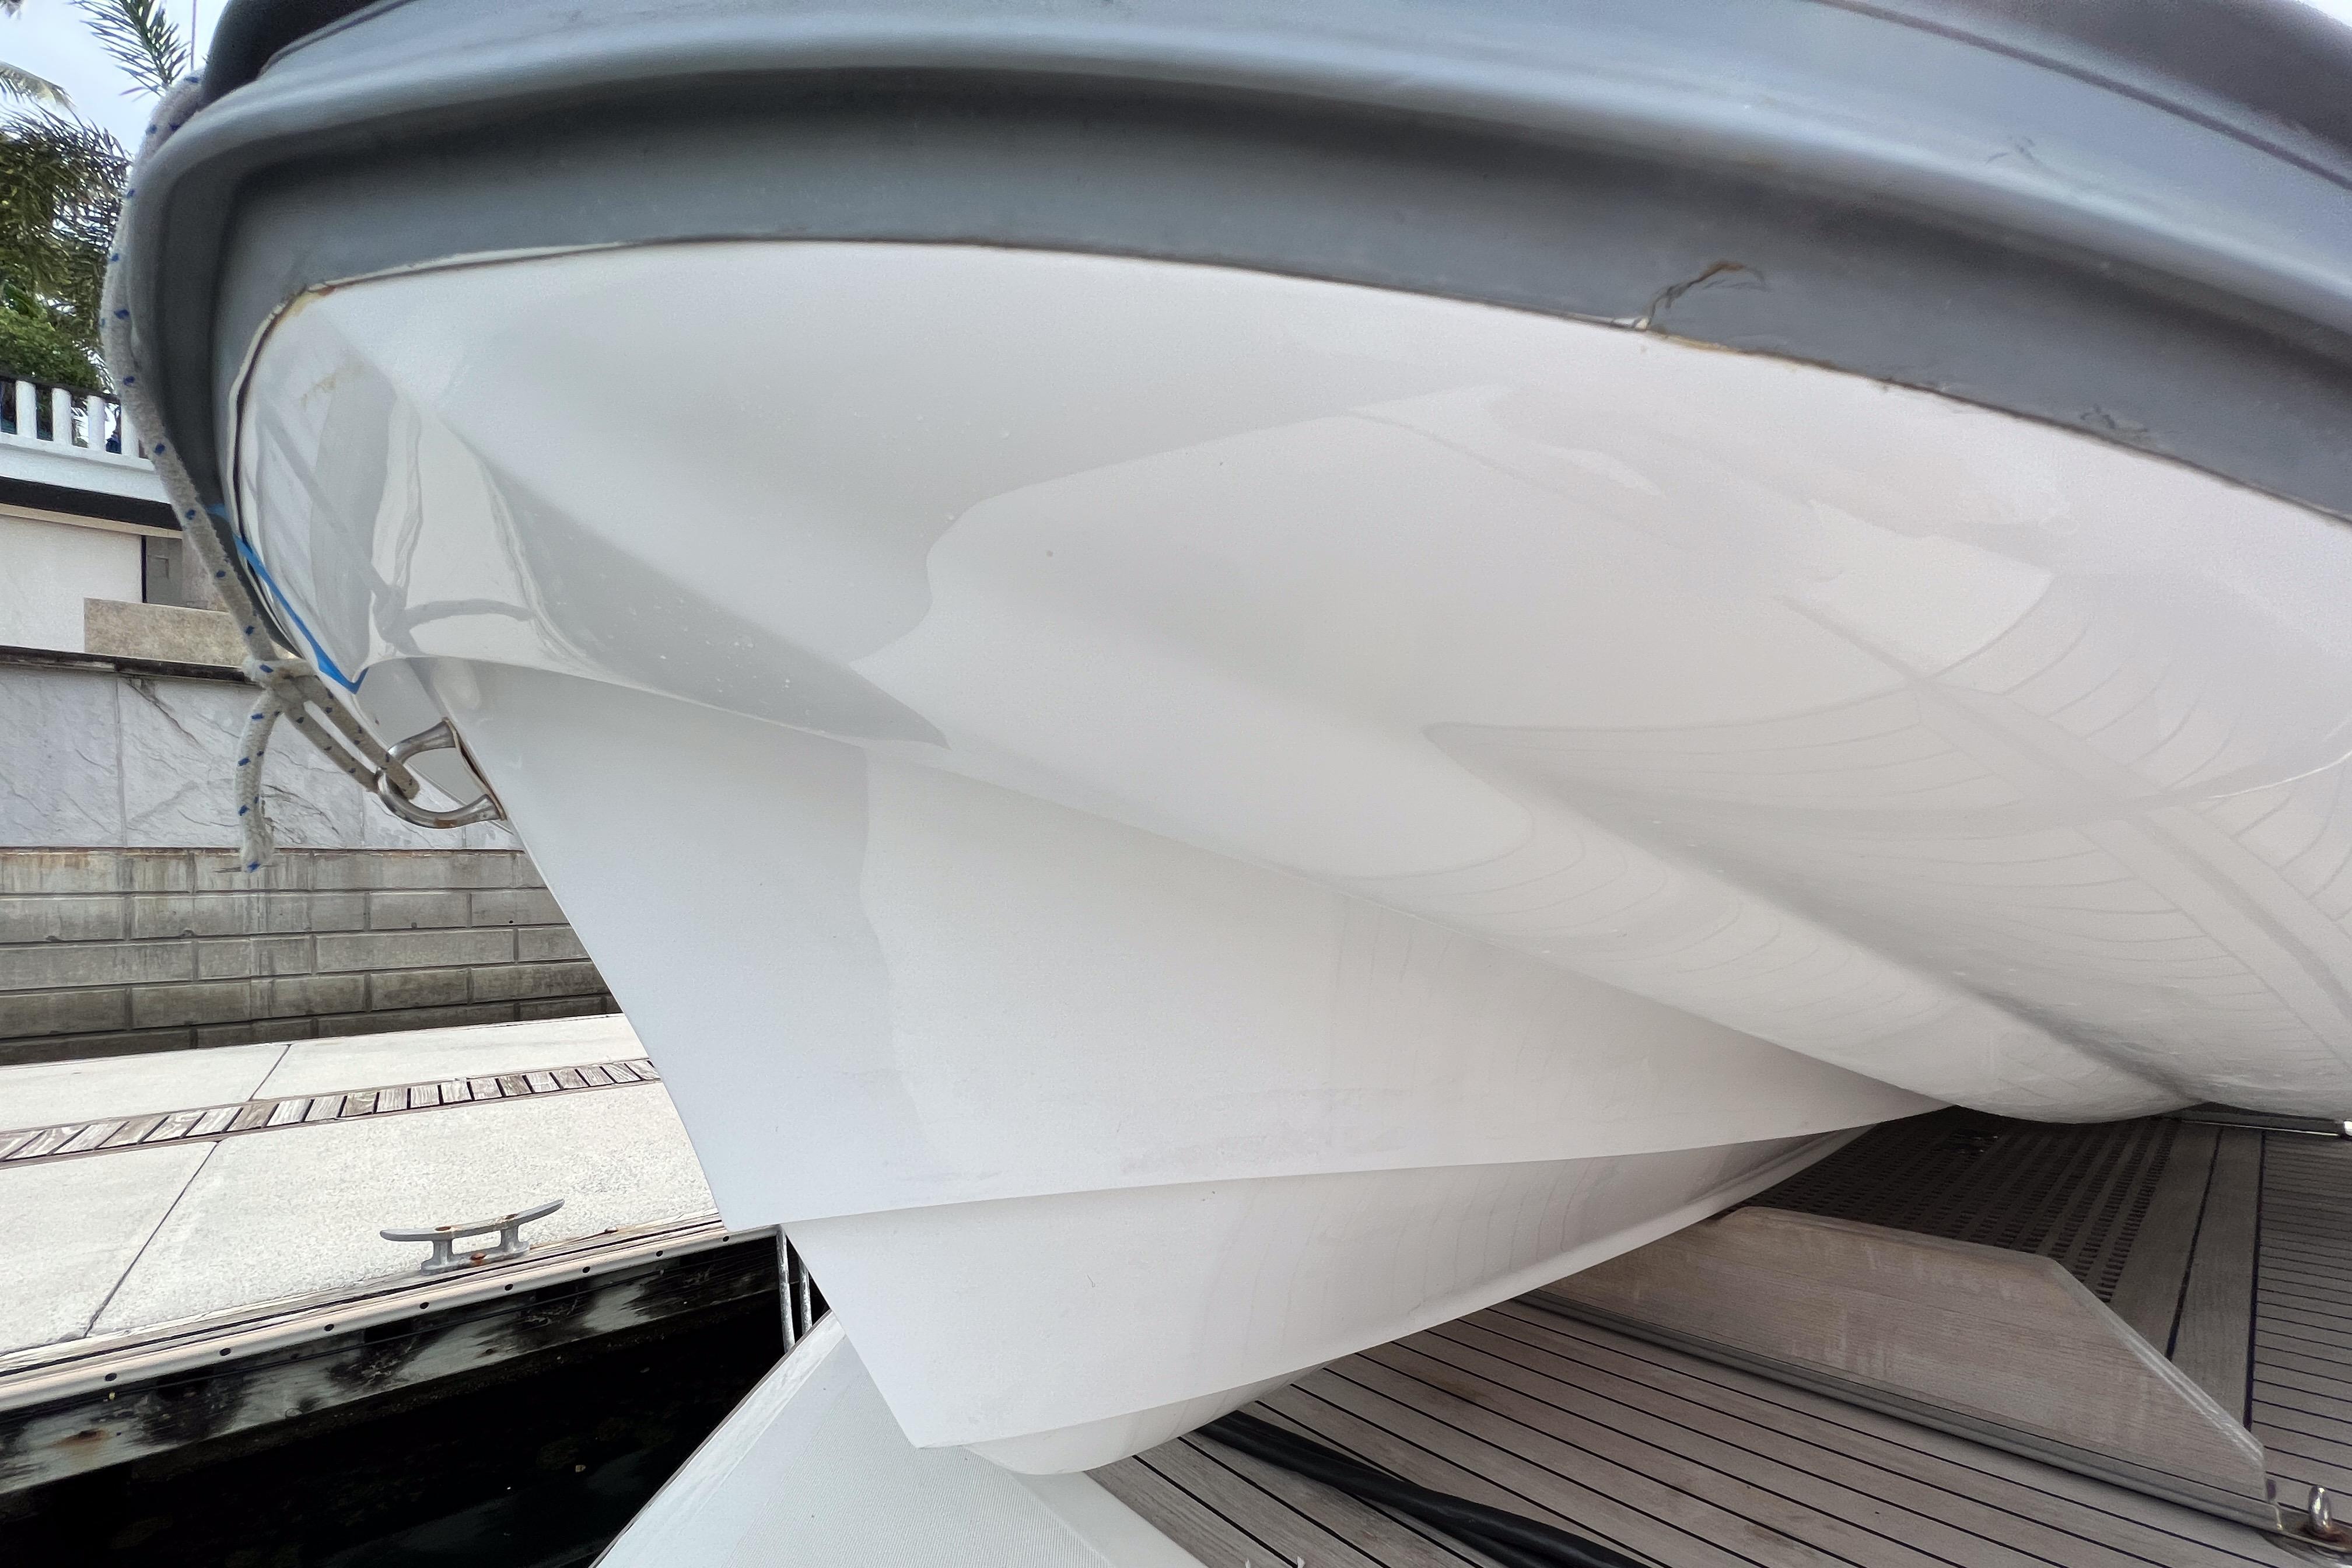 2015 Monte Carlo Yachts MCY 86